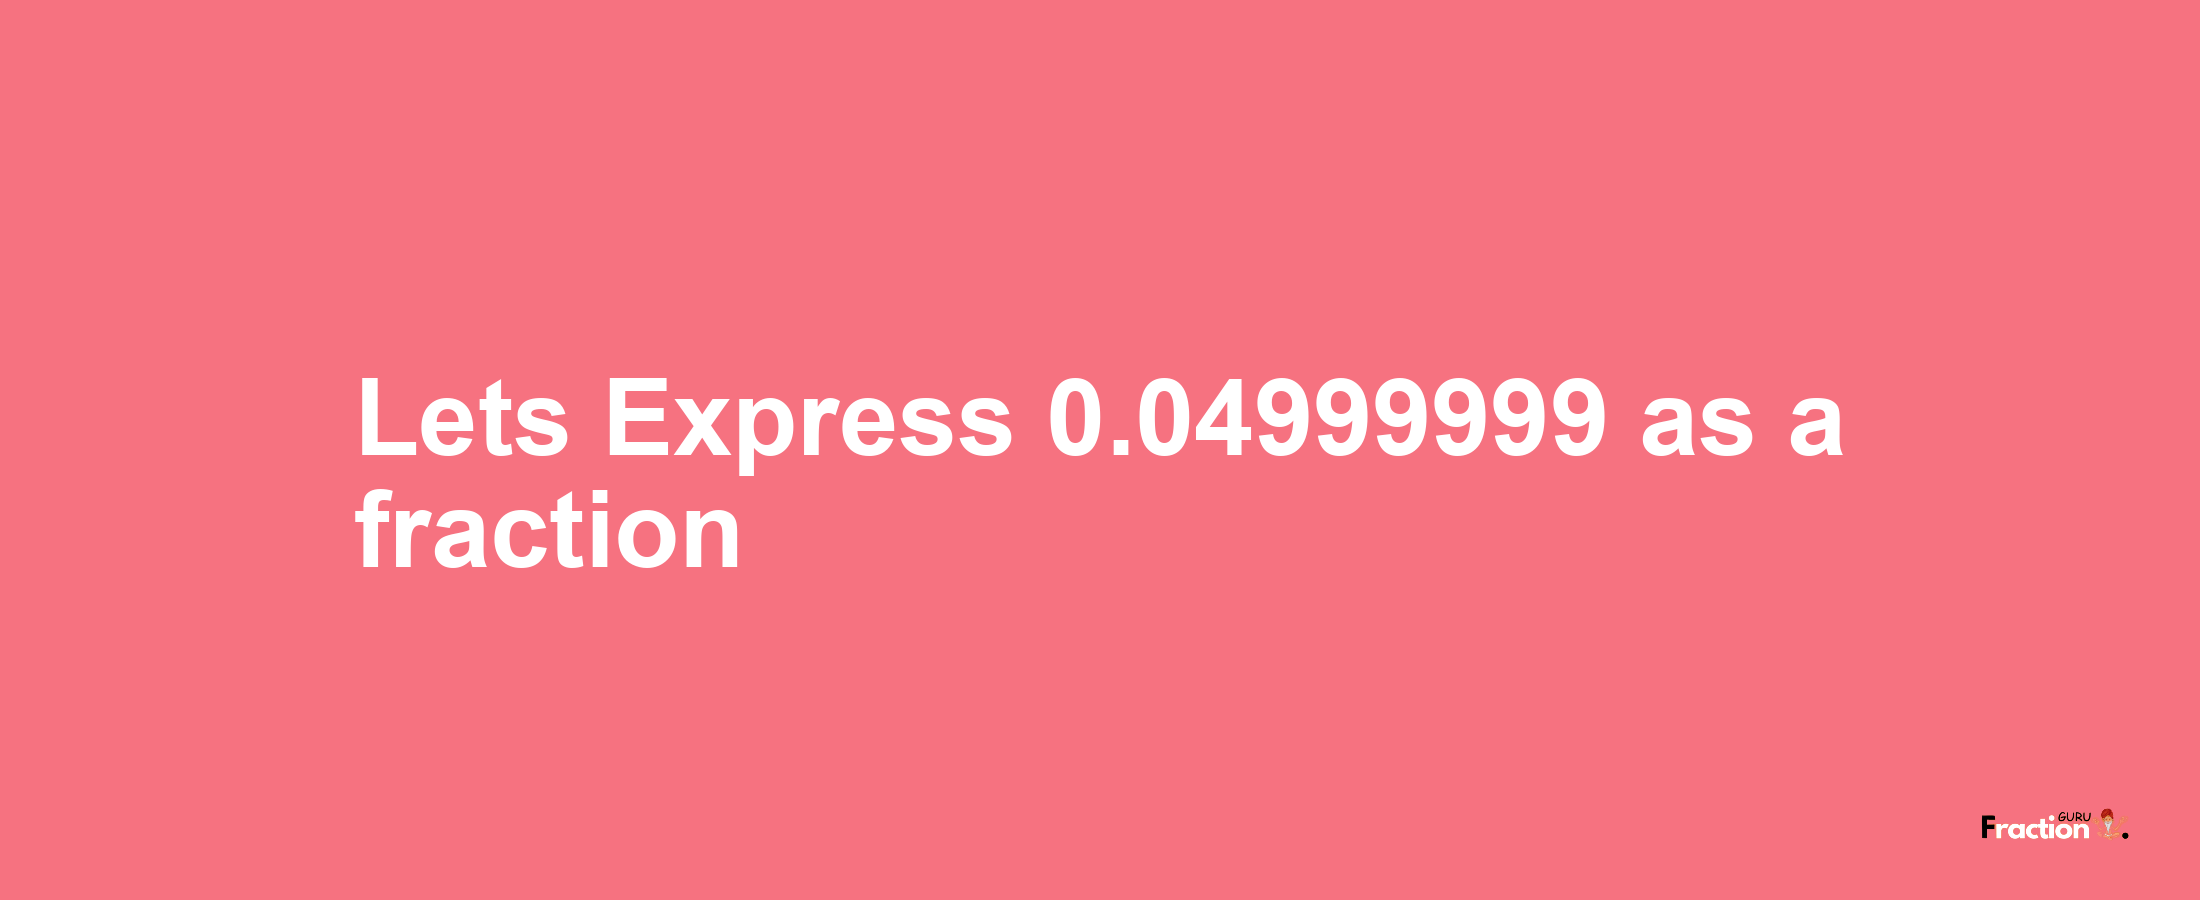 Lets Express 0.04999999 as afraction